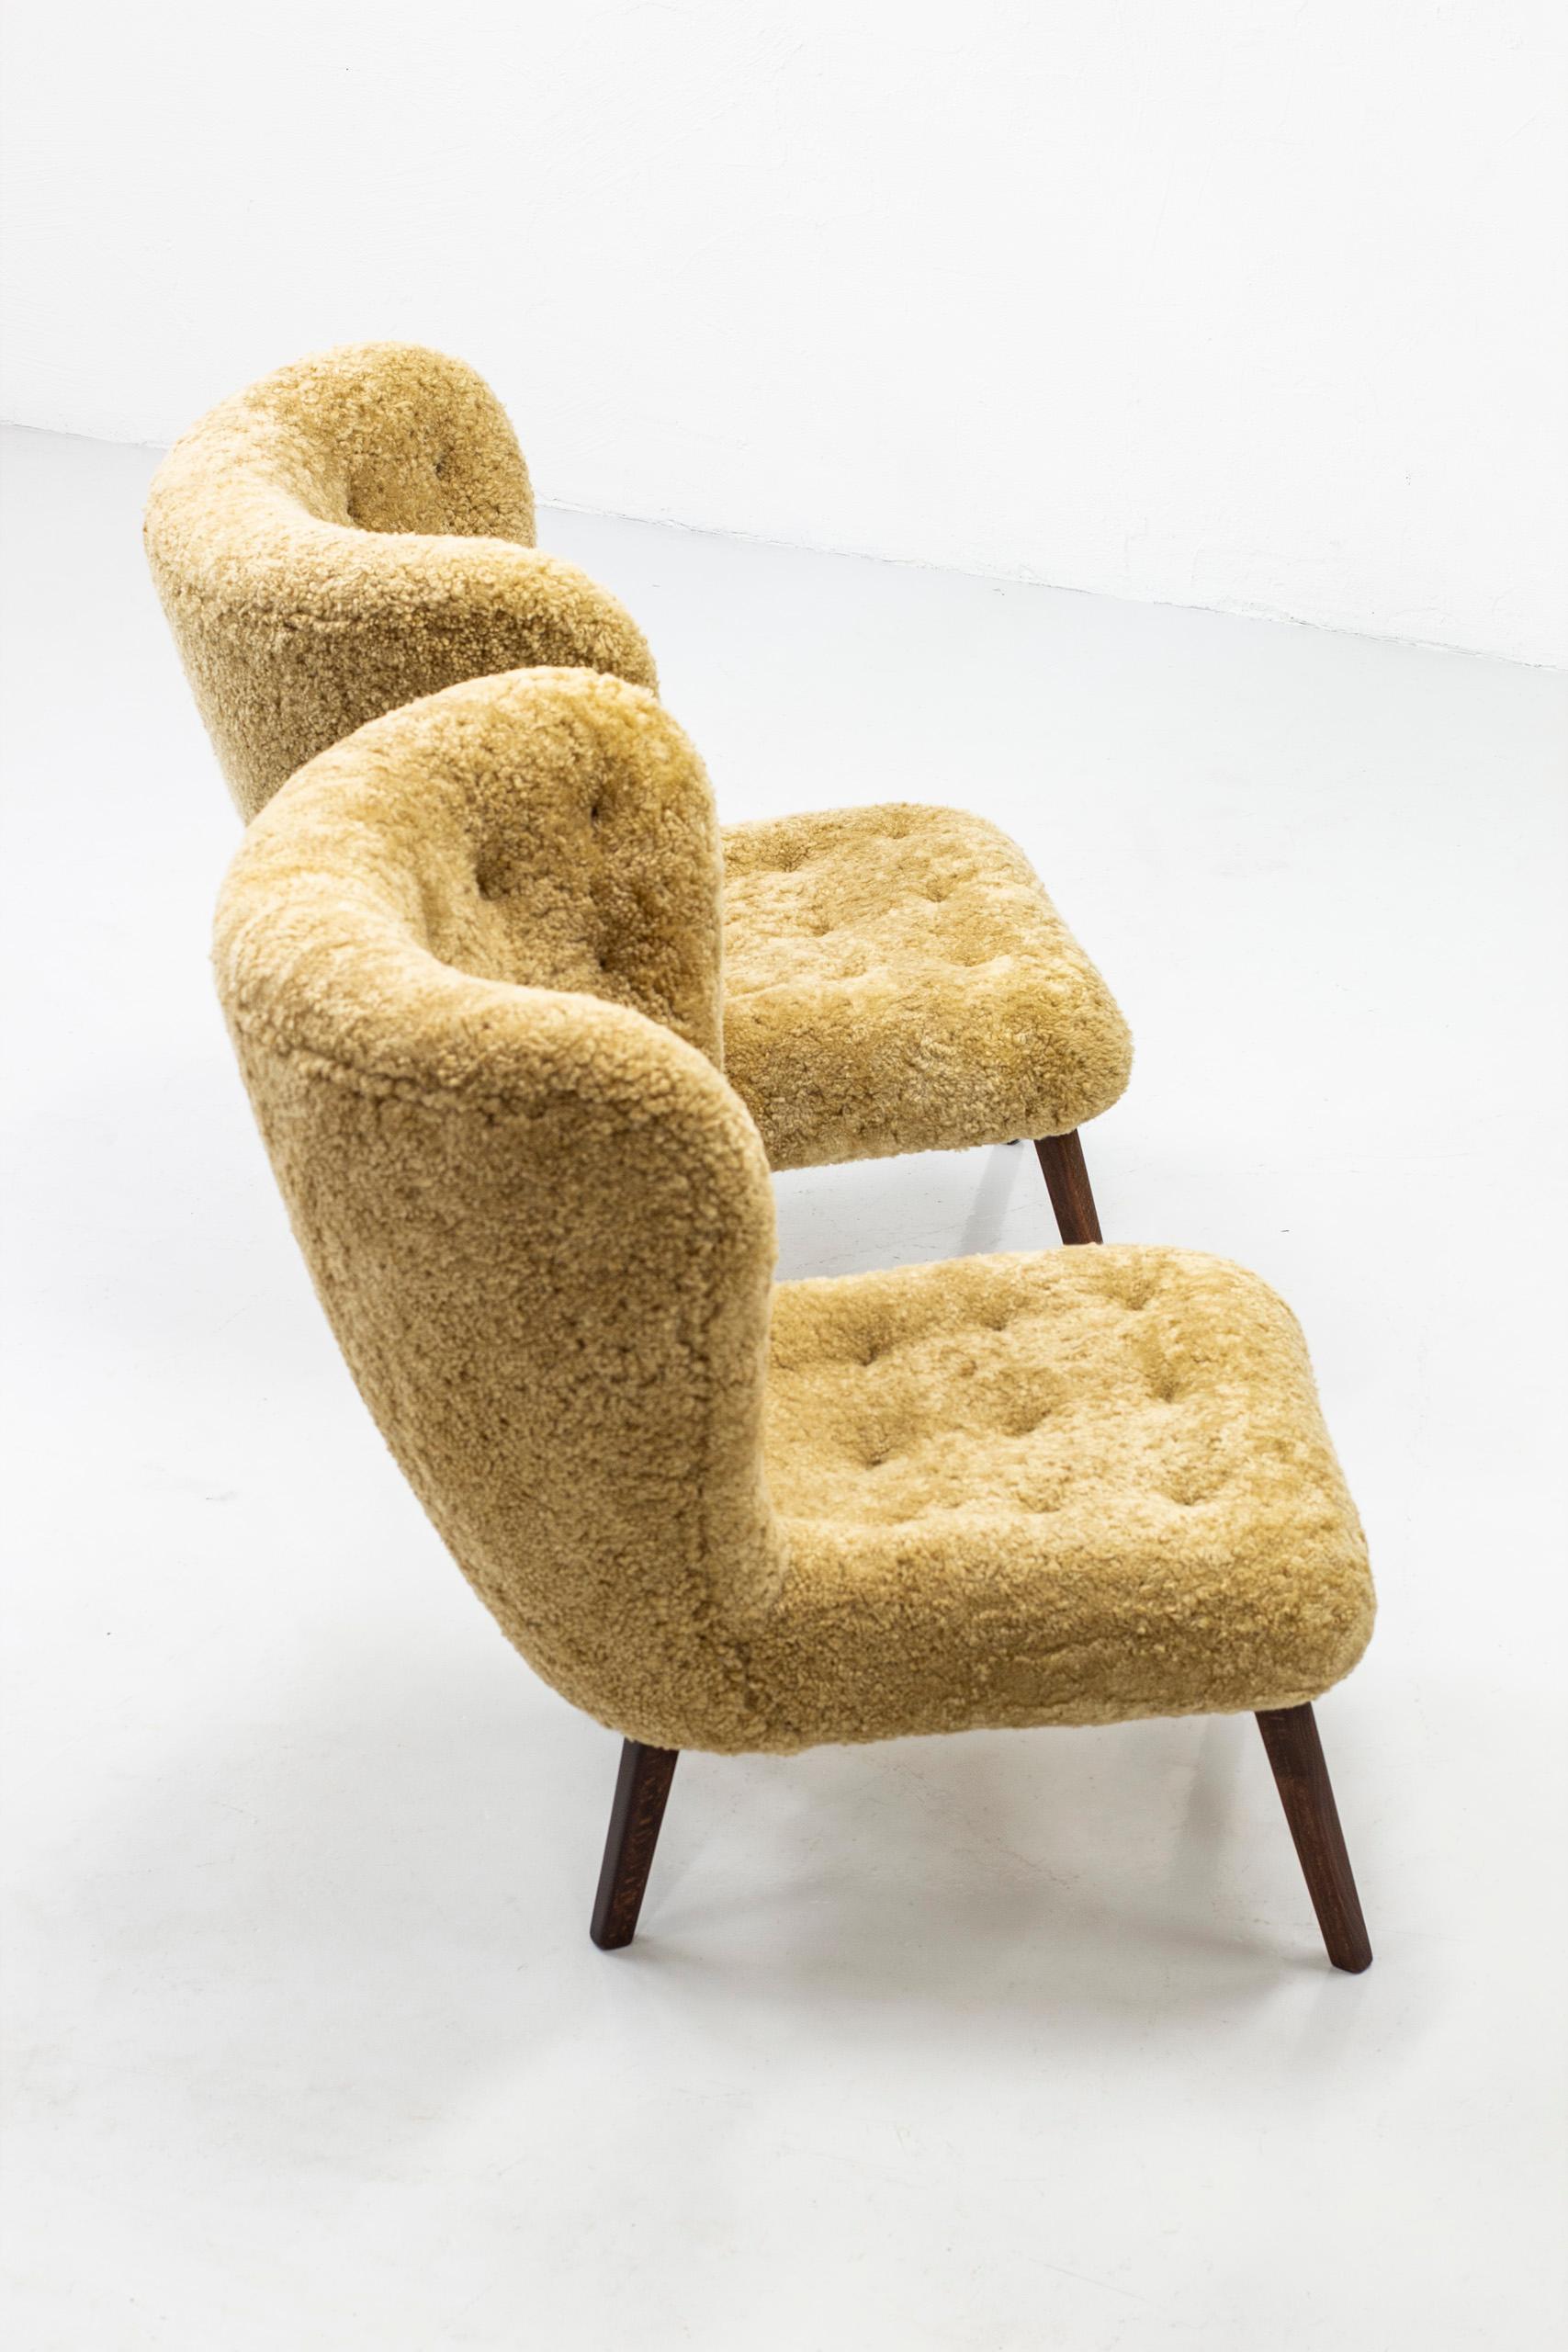 Pair of exquisite lounge chairs in the manner of Viggo Boesen. Produced in Denmark during the 1940-50s. Rare aesthetic with a large oversized back rest. Tufted with about 40 buttons on each chair. Restored dark stained oak legs and new sheep skin